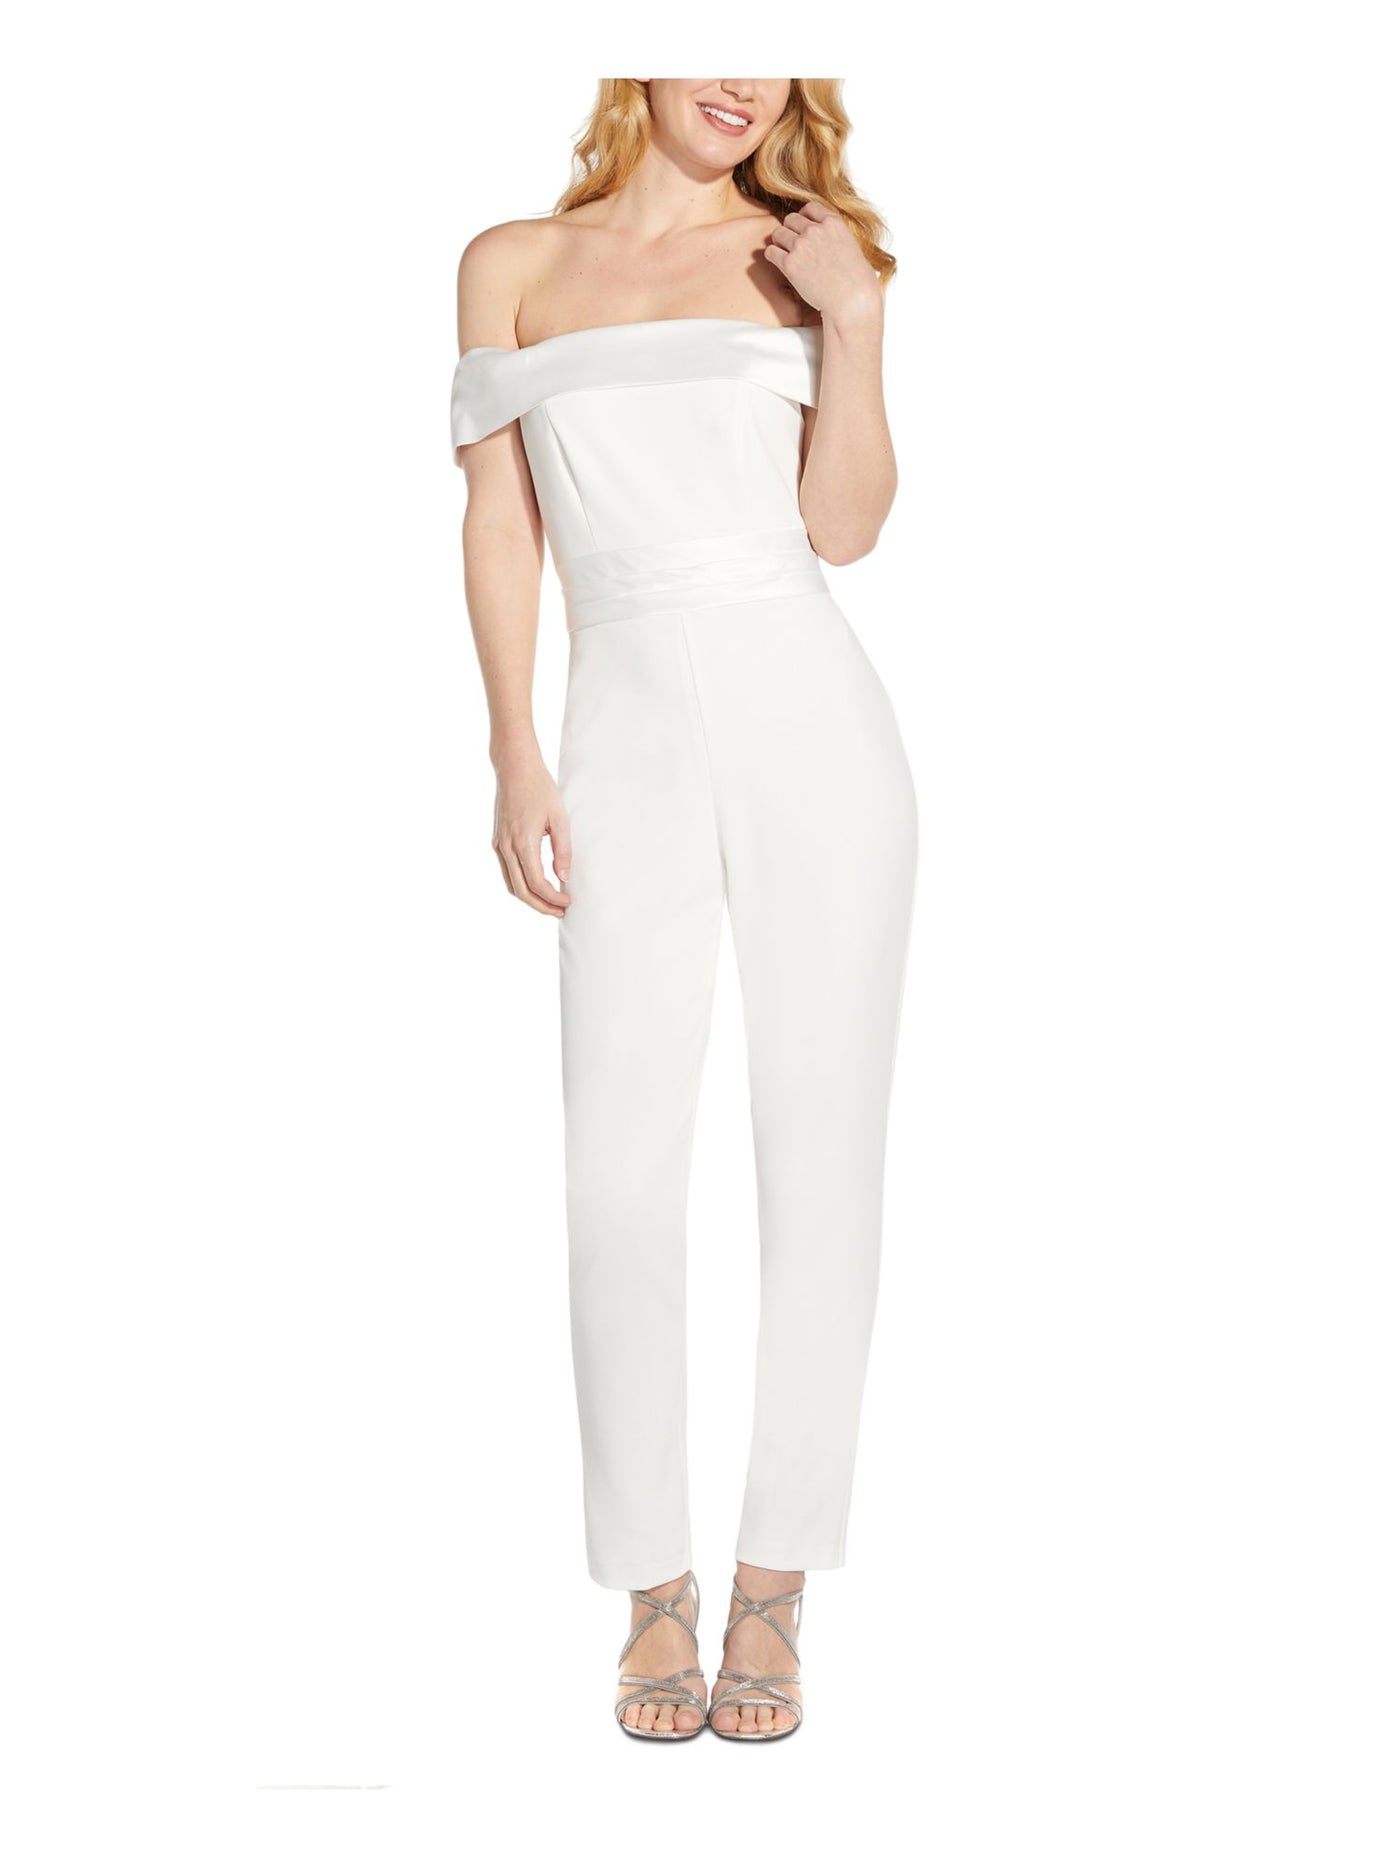 ADRIANNA PAPELL Womens Ivory Stretch Zippered Short Sleeve Off Shoulder Party Skinny Jumpsuit 6